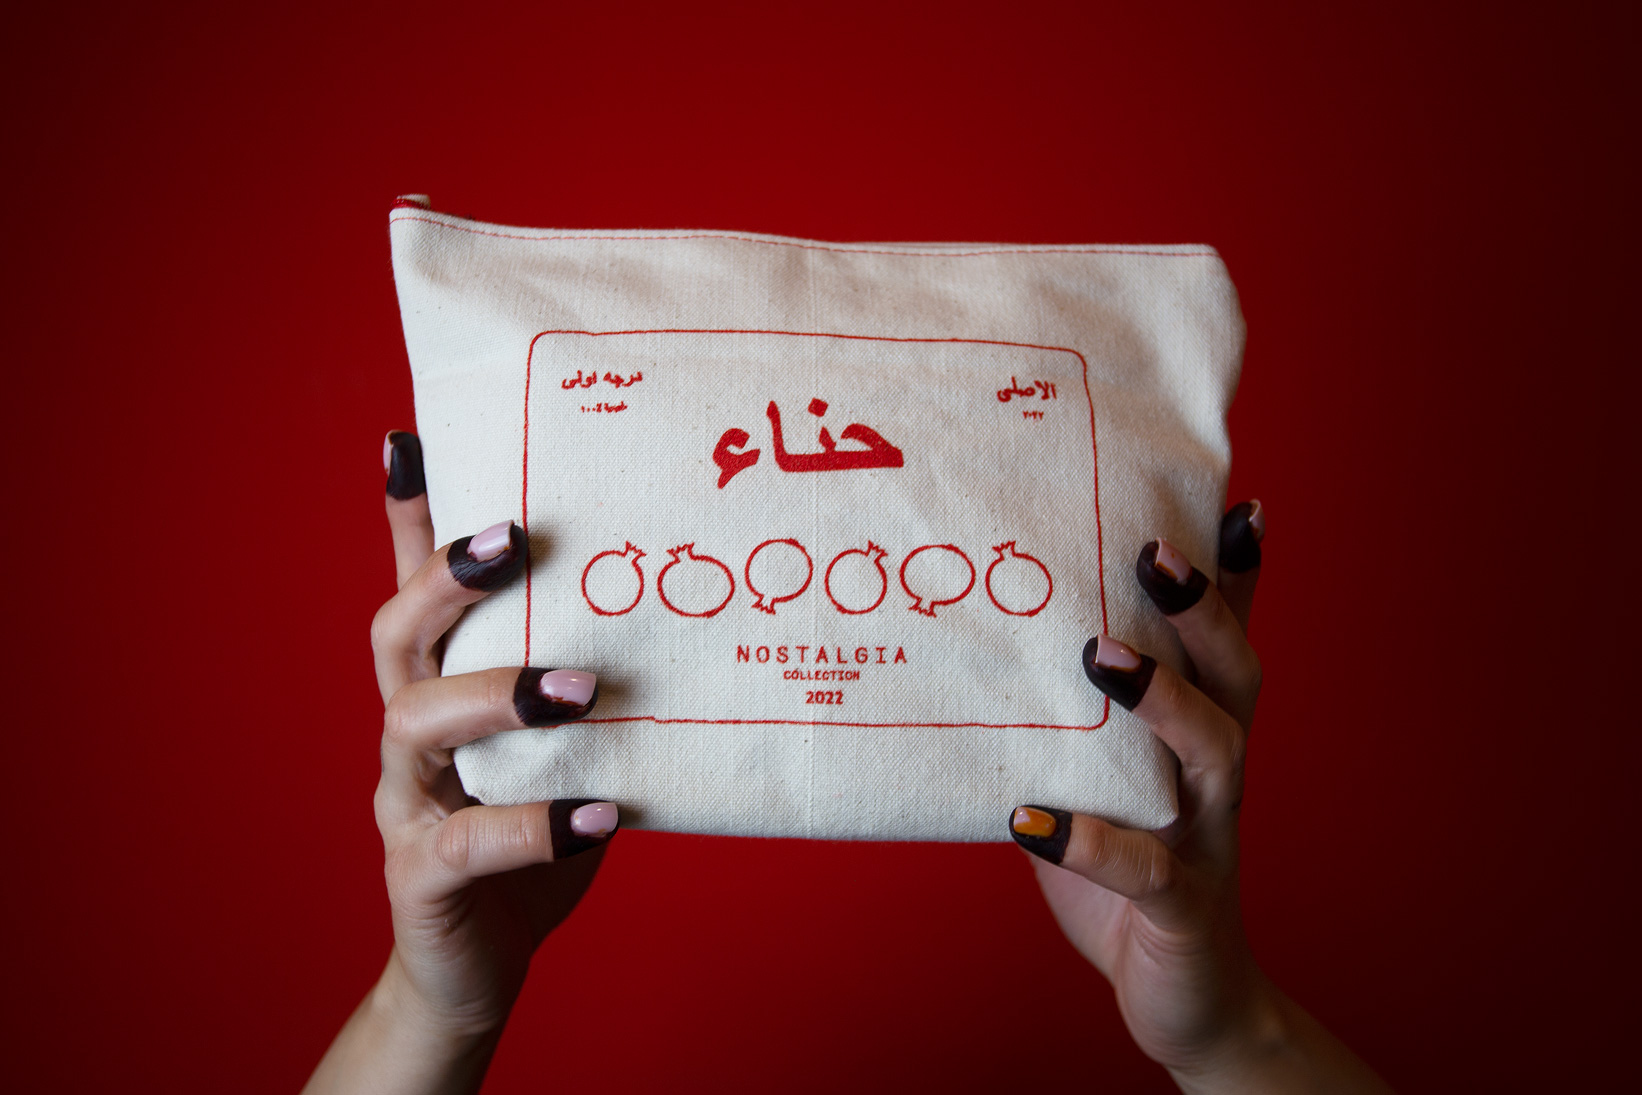 Red background and henna hands holding up a white pouch